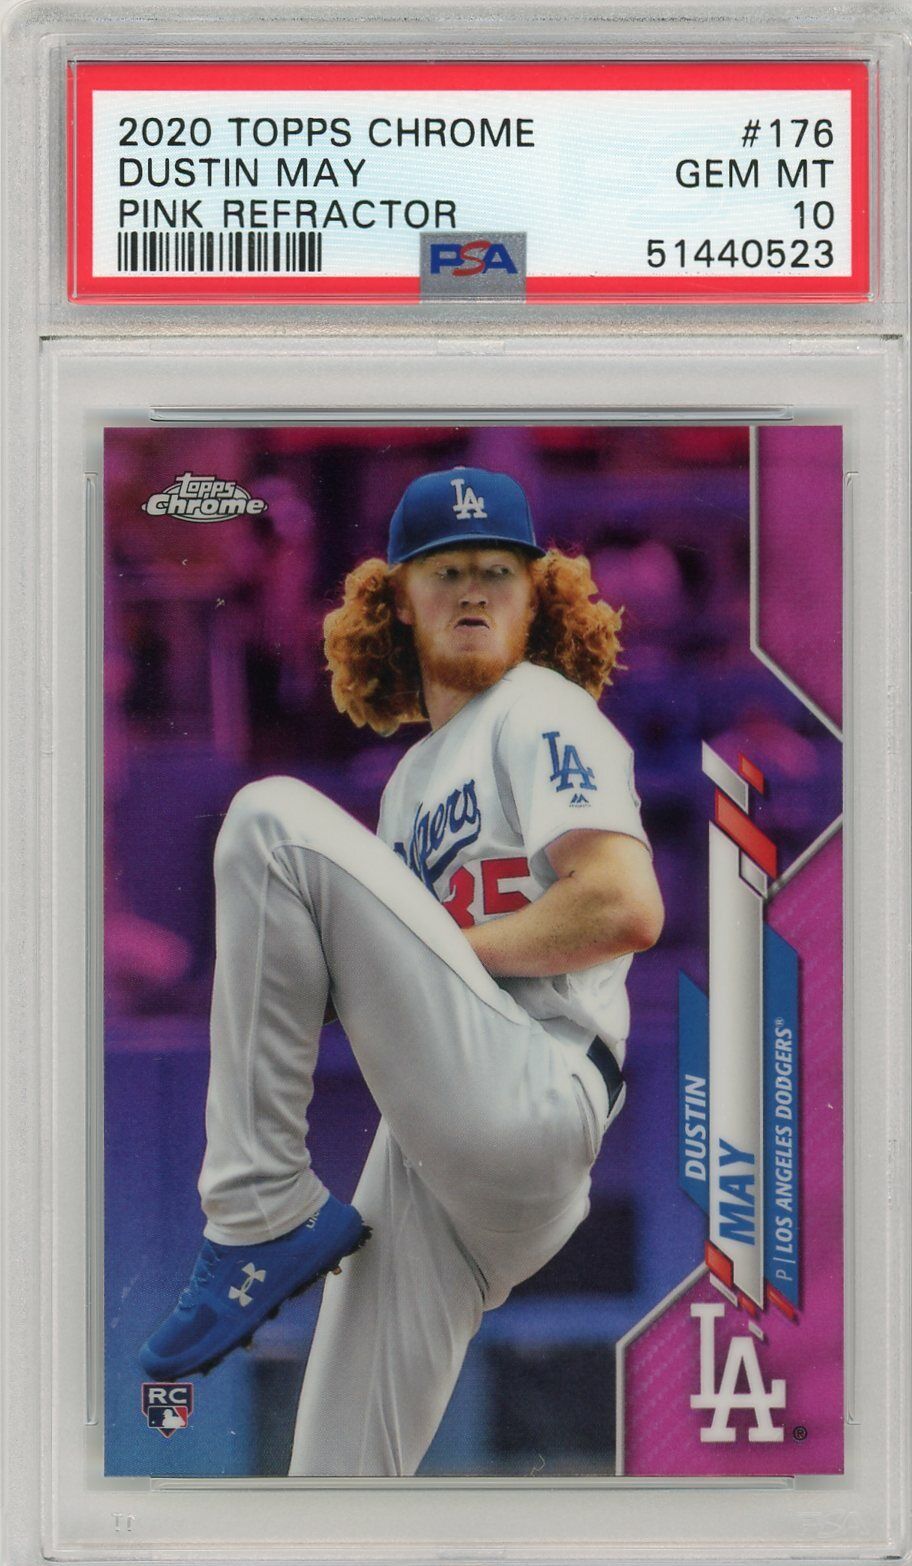 DUSTIN MAY 2020 Topps Chrome Pink Refractor Non-Auto Dodgers RC Rookie PSA 10